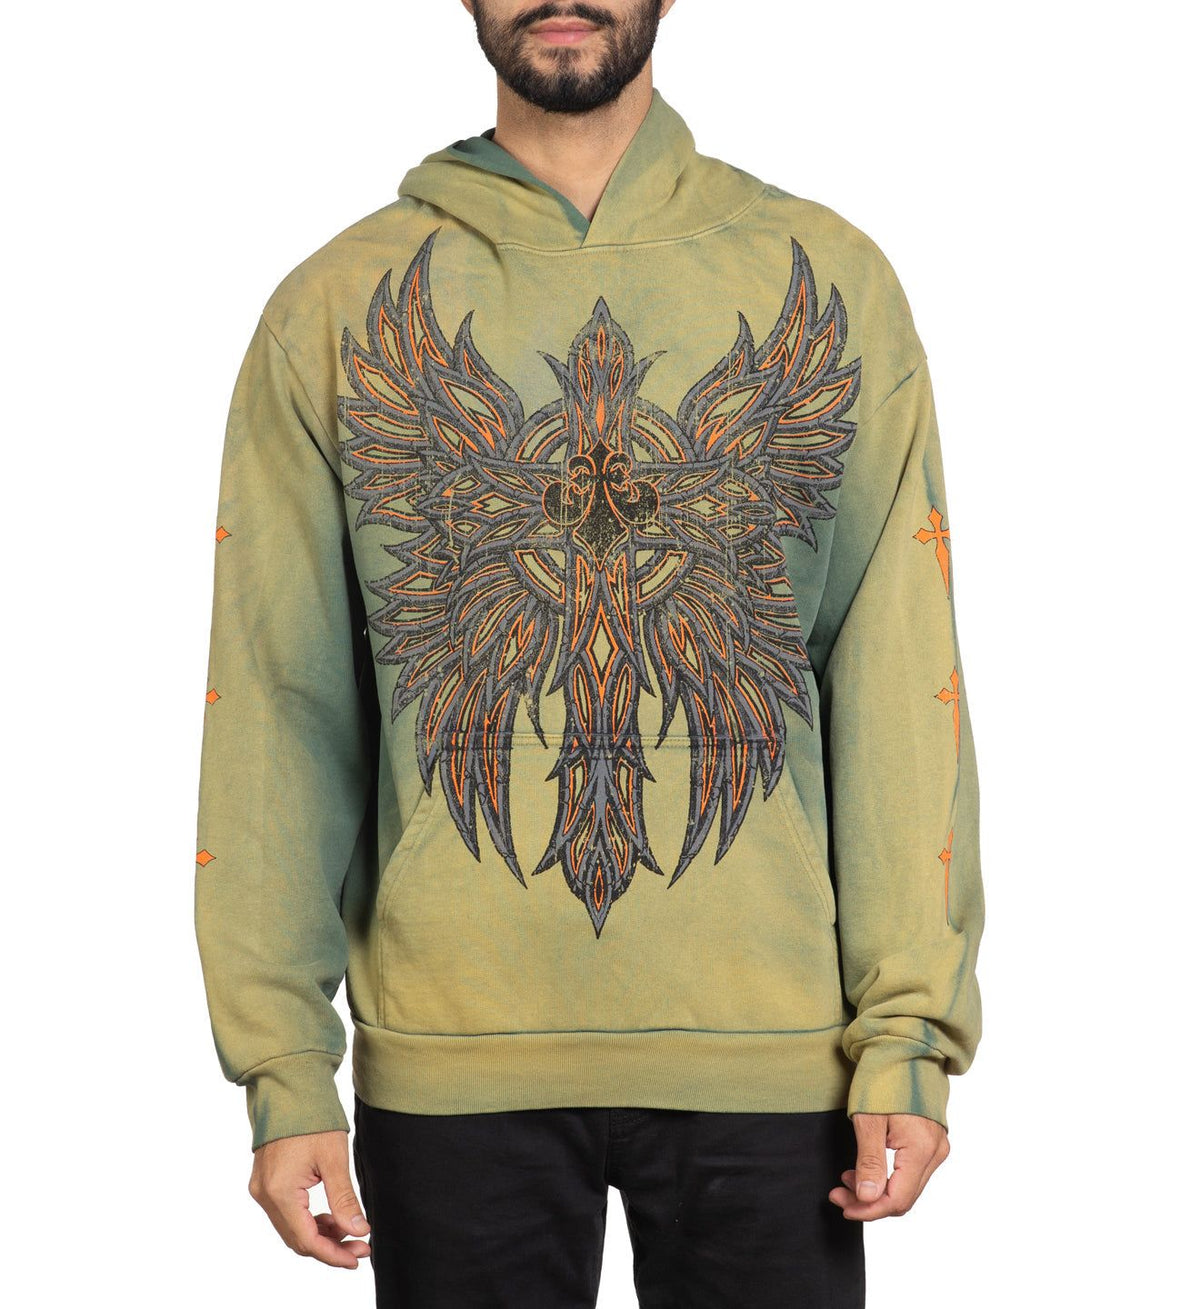 Absolution PO Hood - Affliction Clothing